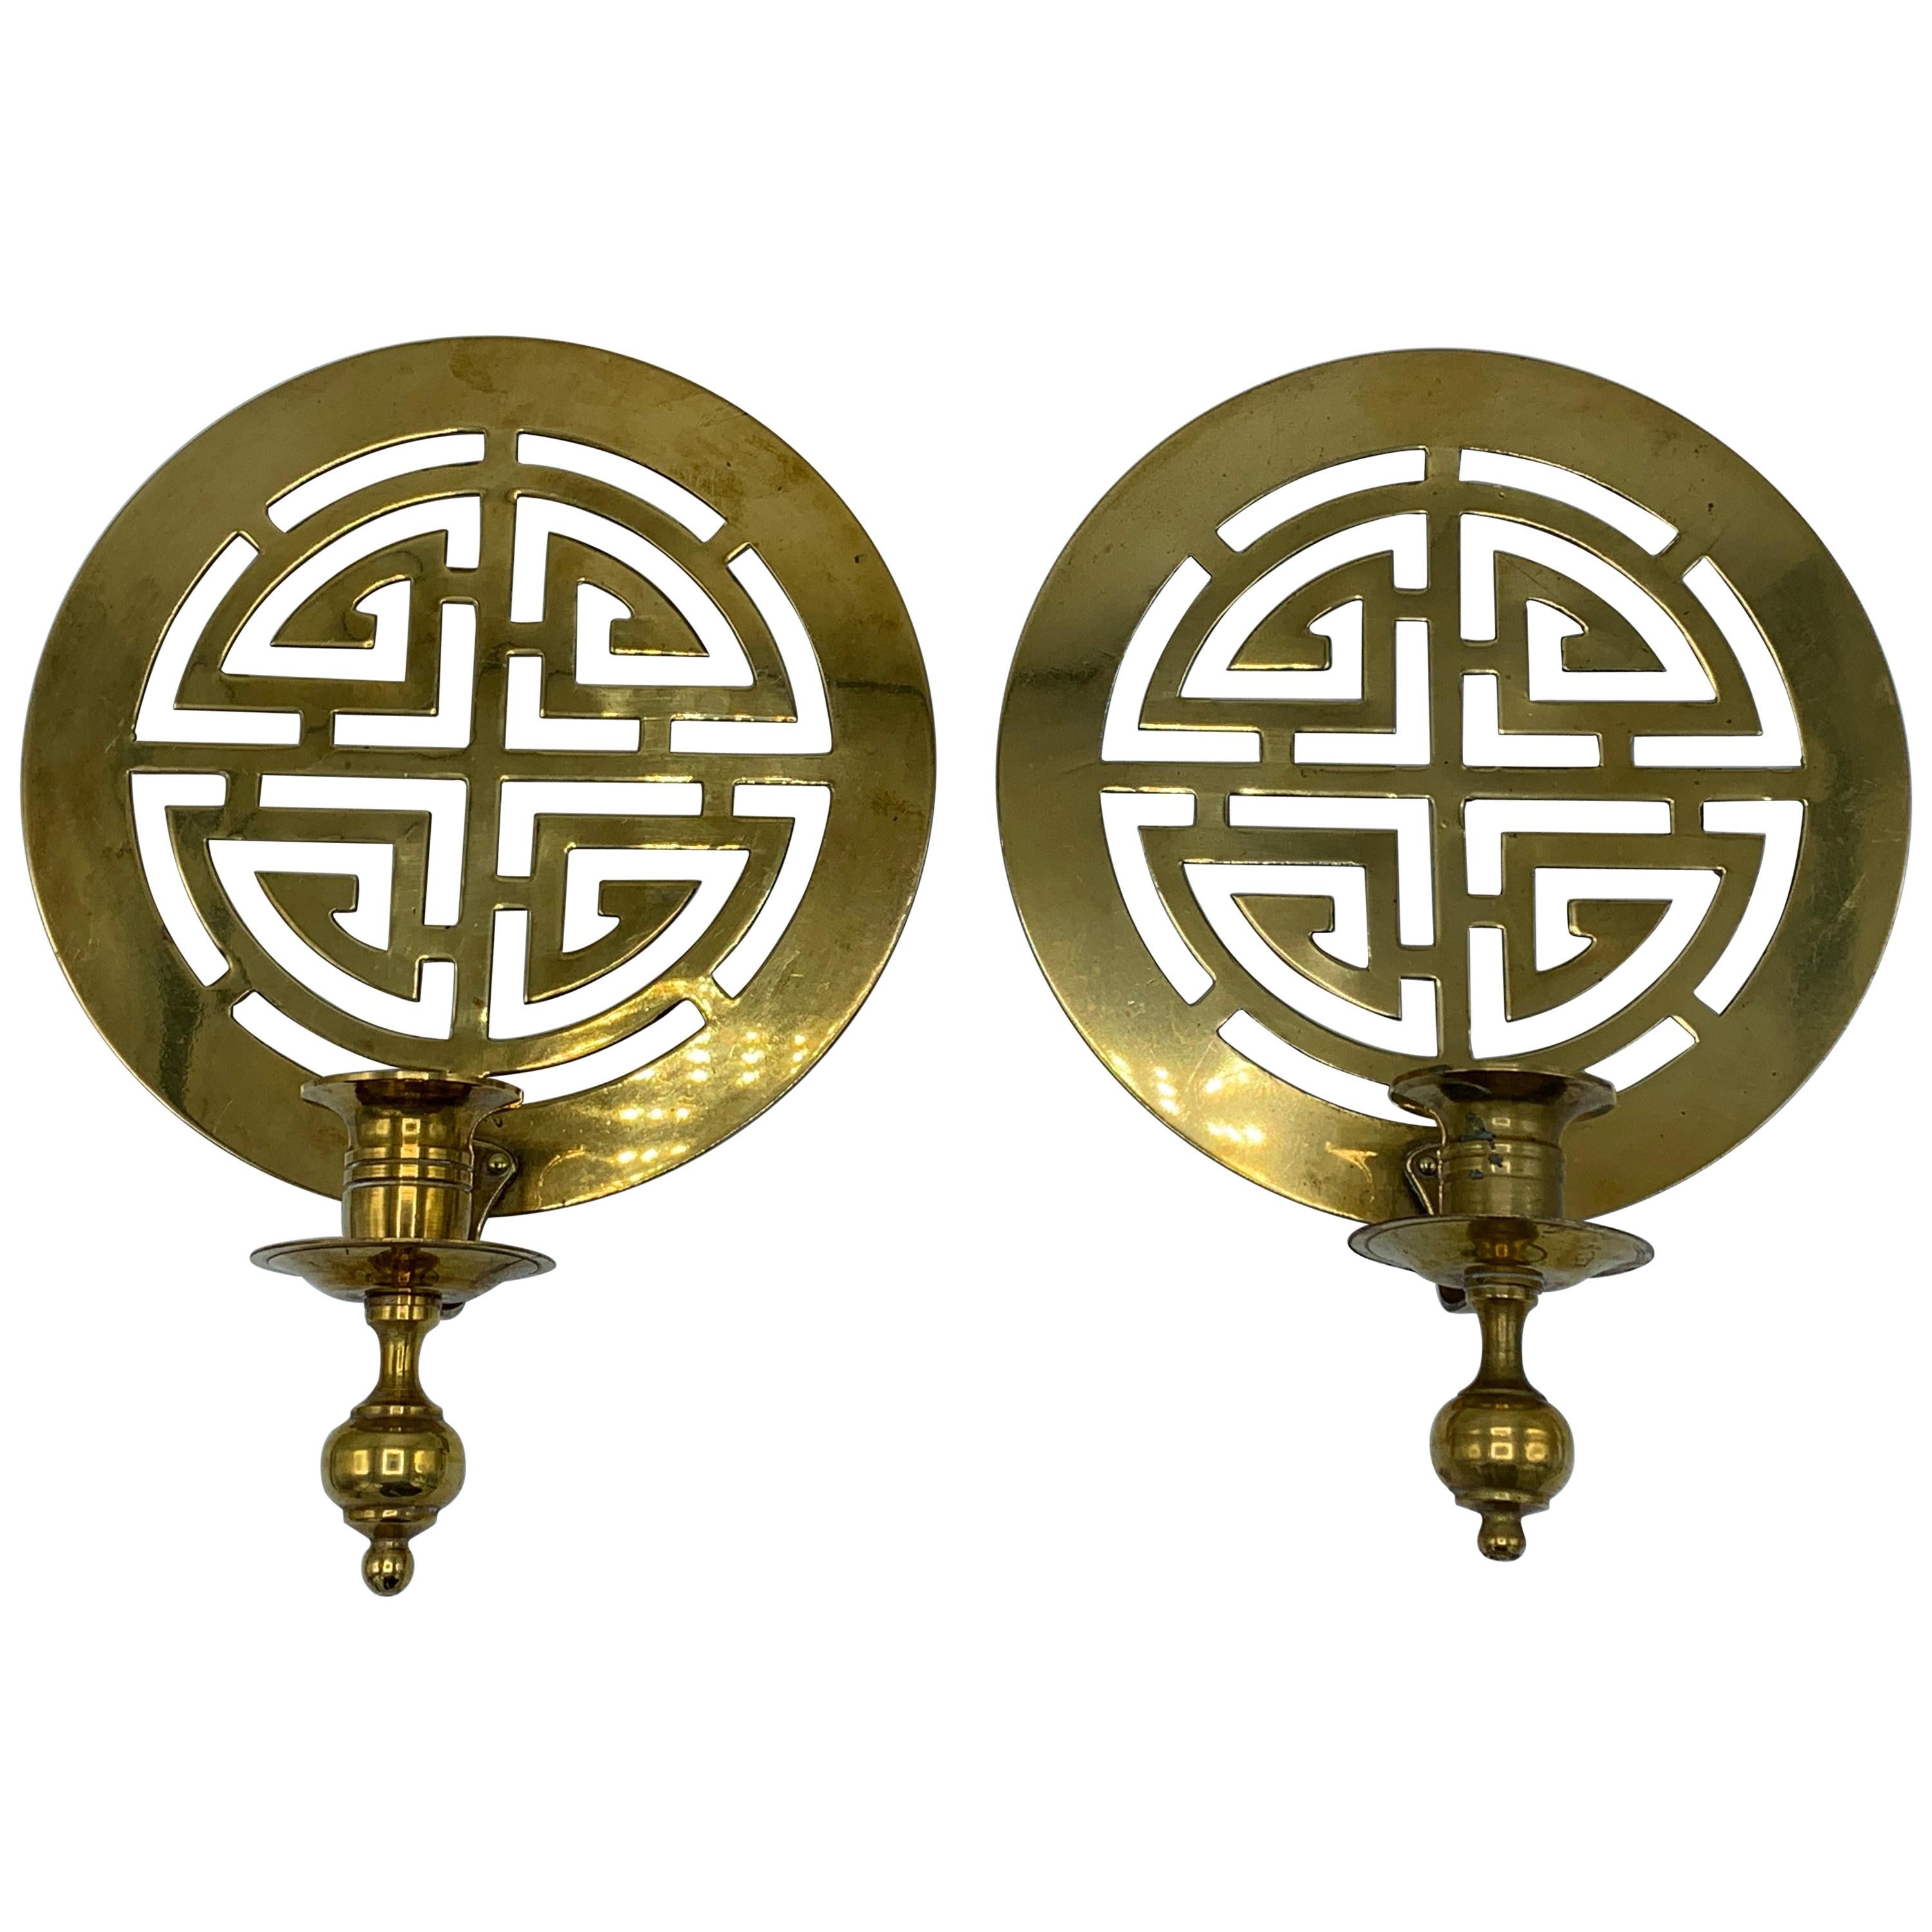 1960s Brass Chinoiserie Symbols Candlestick Wall Sconces, Pair For Sale